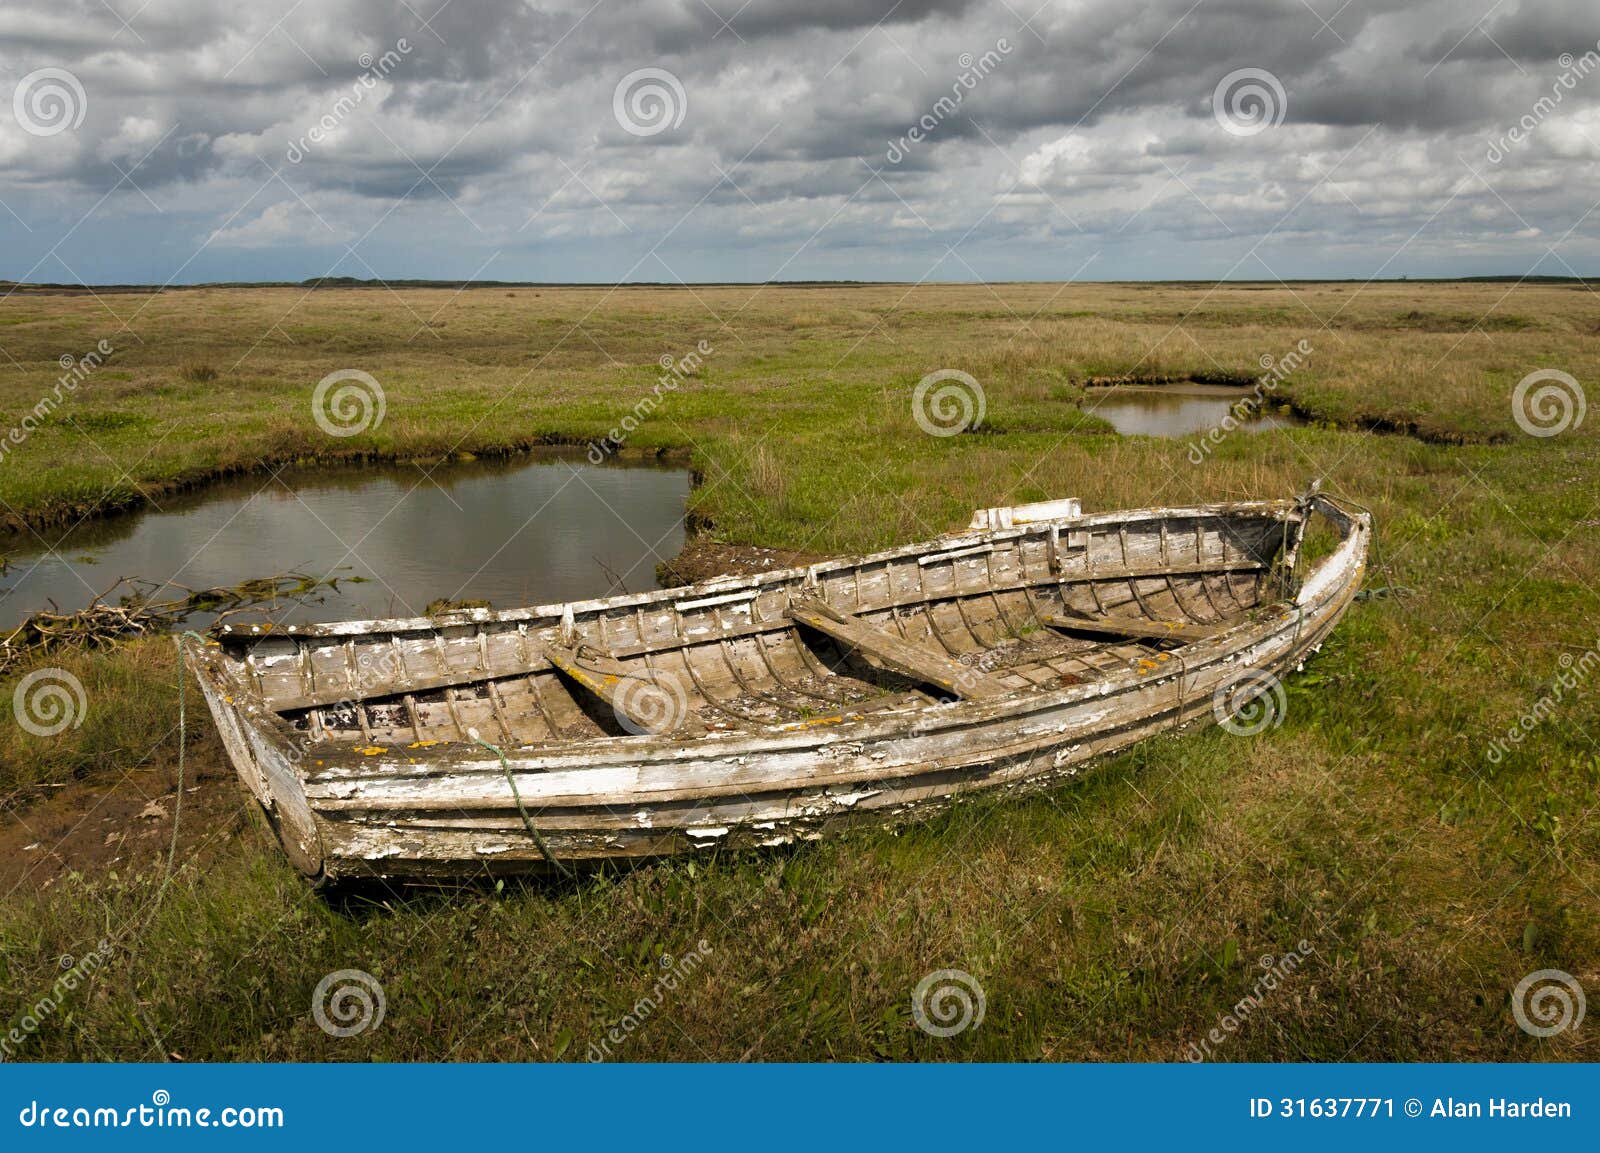 Old rotting wooden rowing boat at Brancaster Norfolk England.